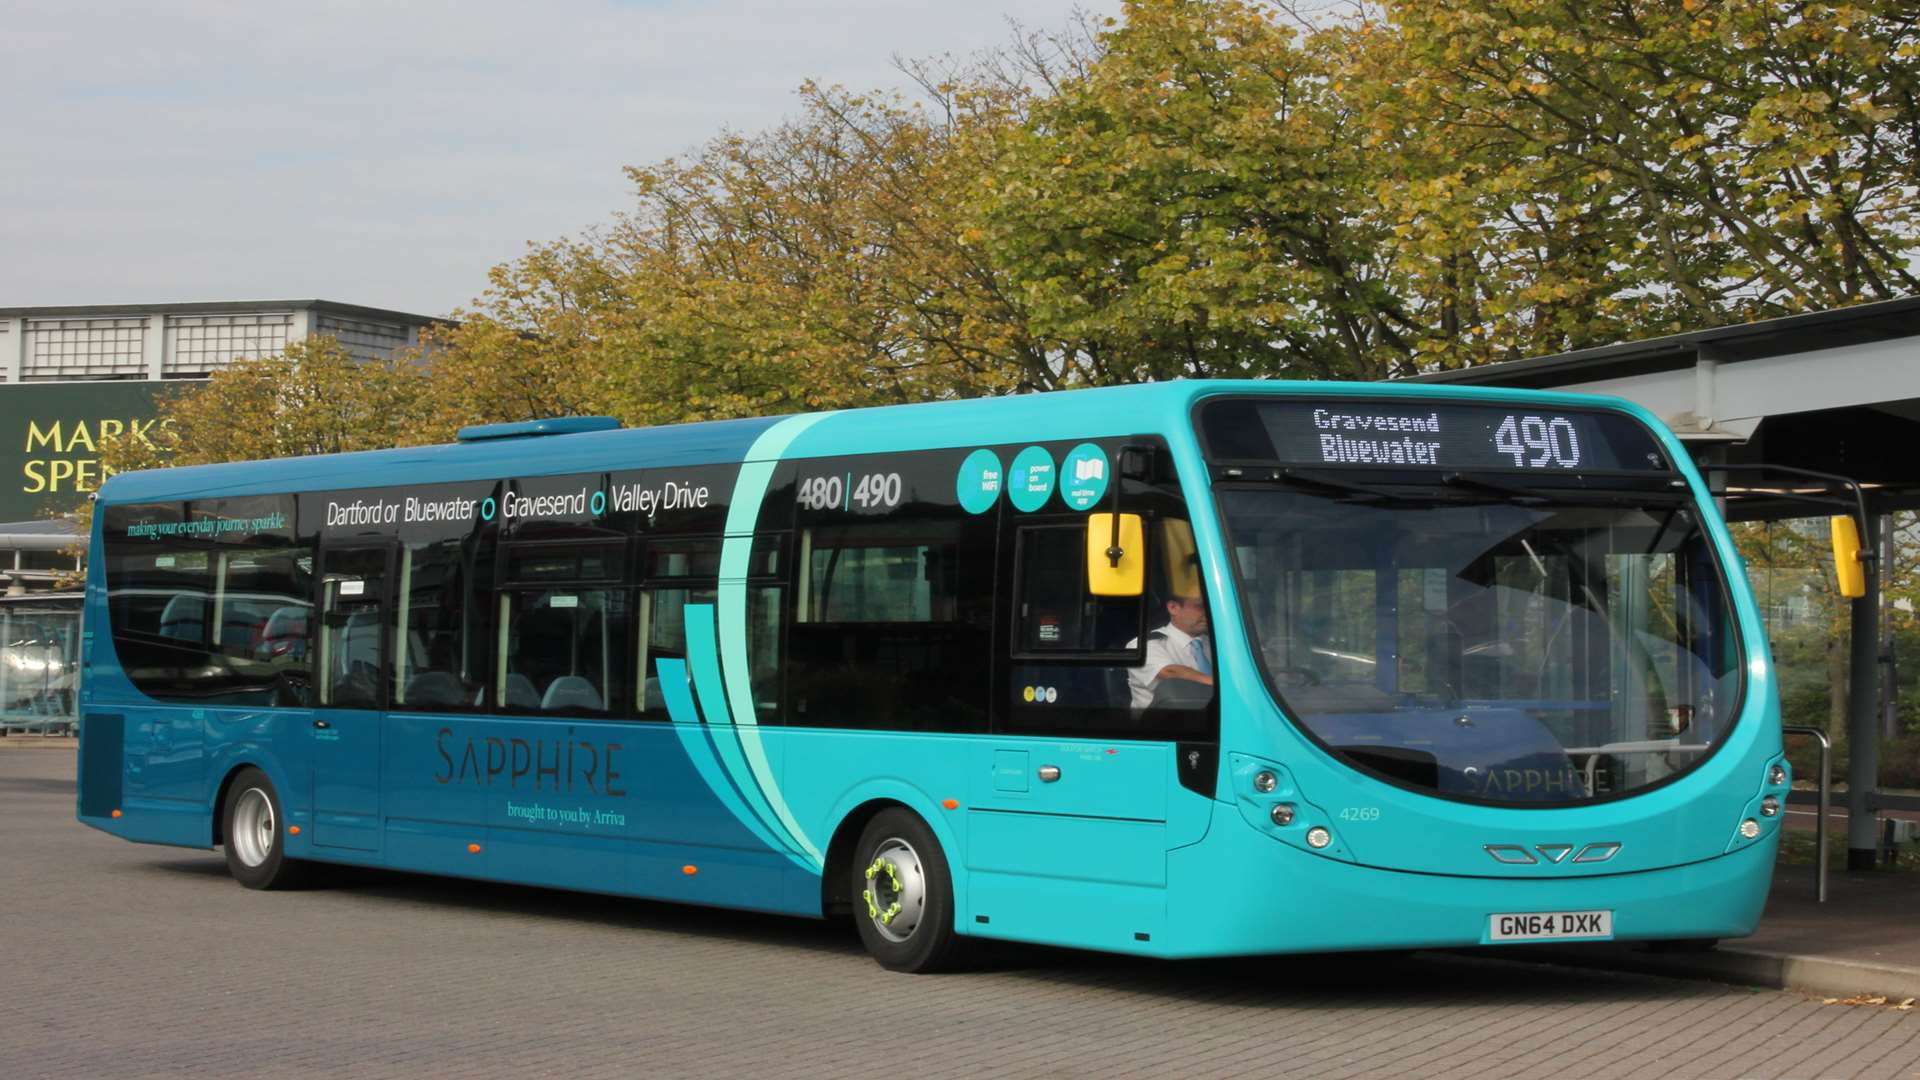 Arriva is under fire for the changes